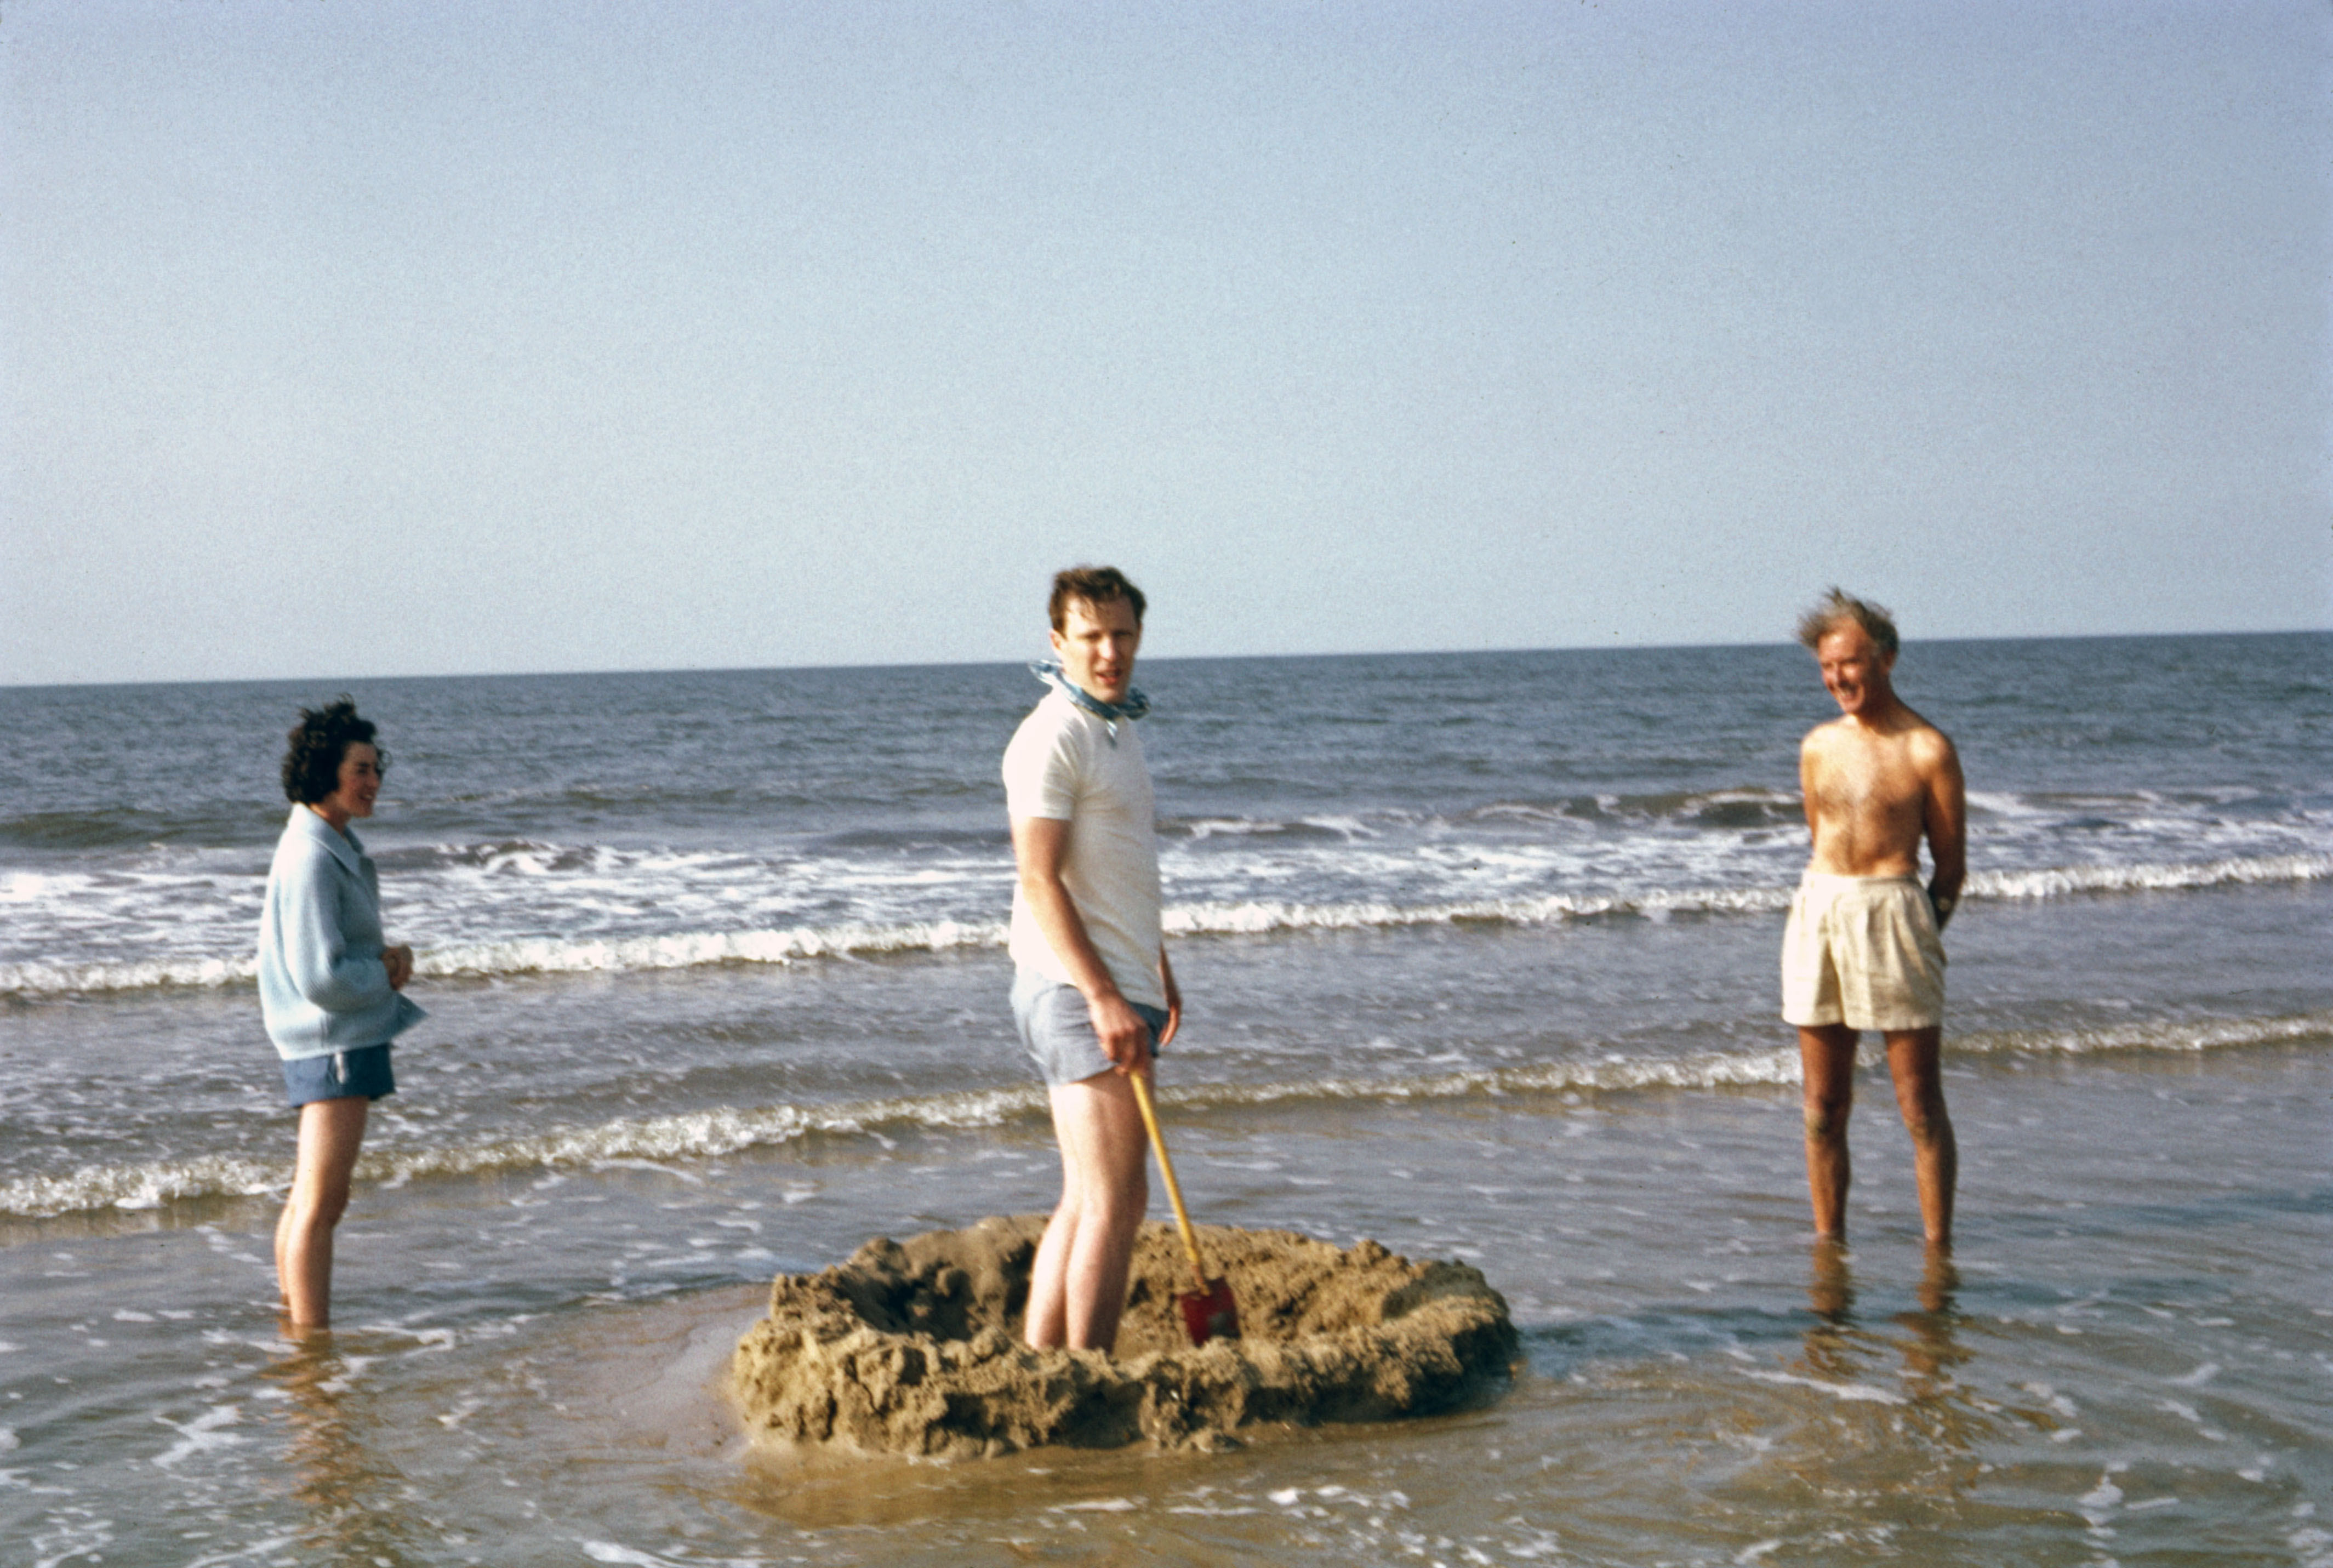 June 1966 Holding the tide at bay?